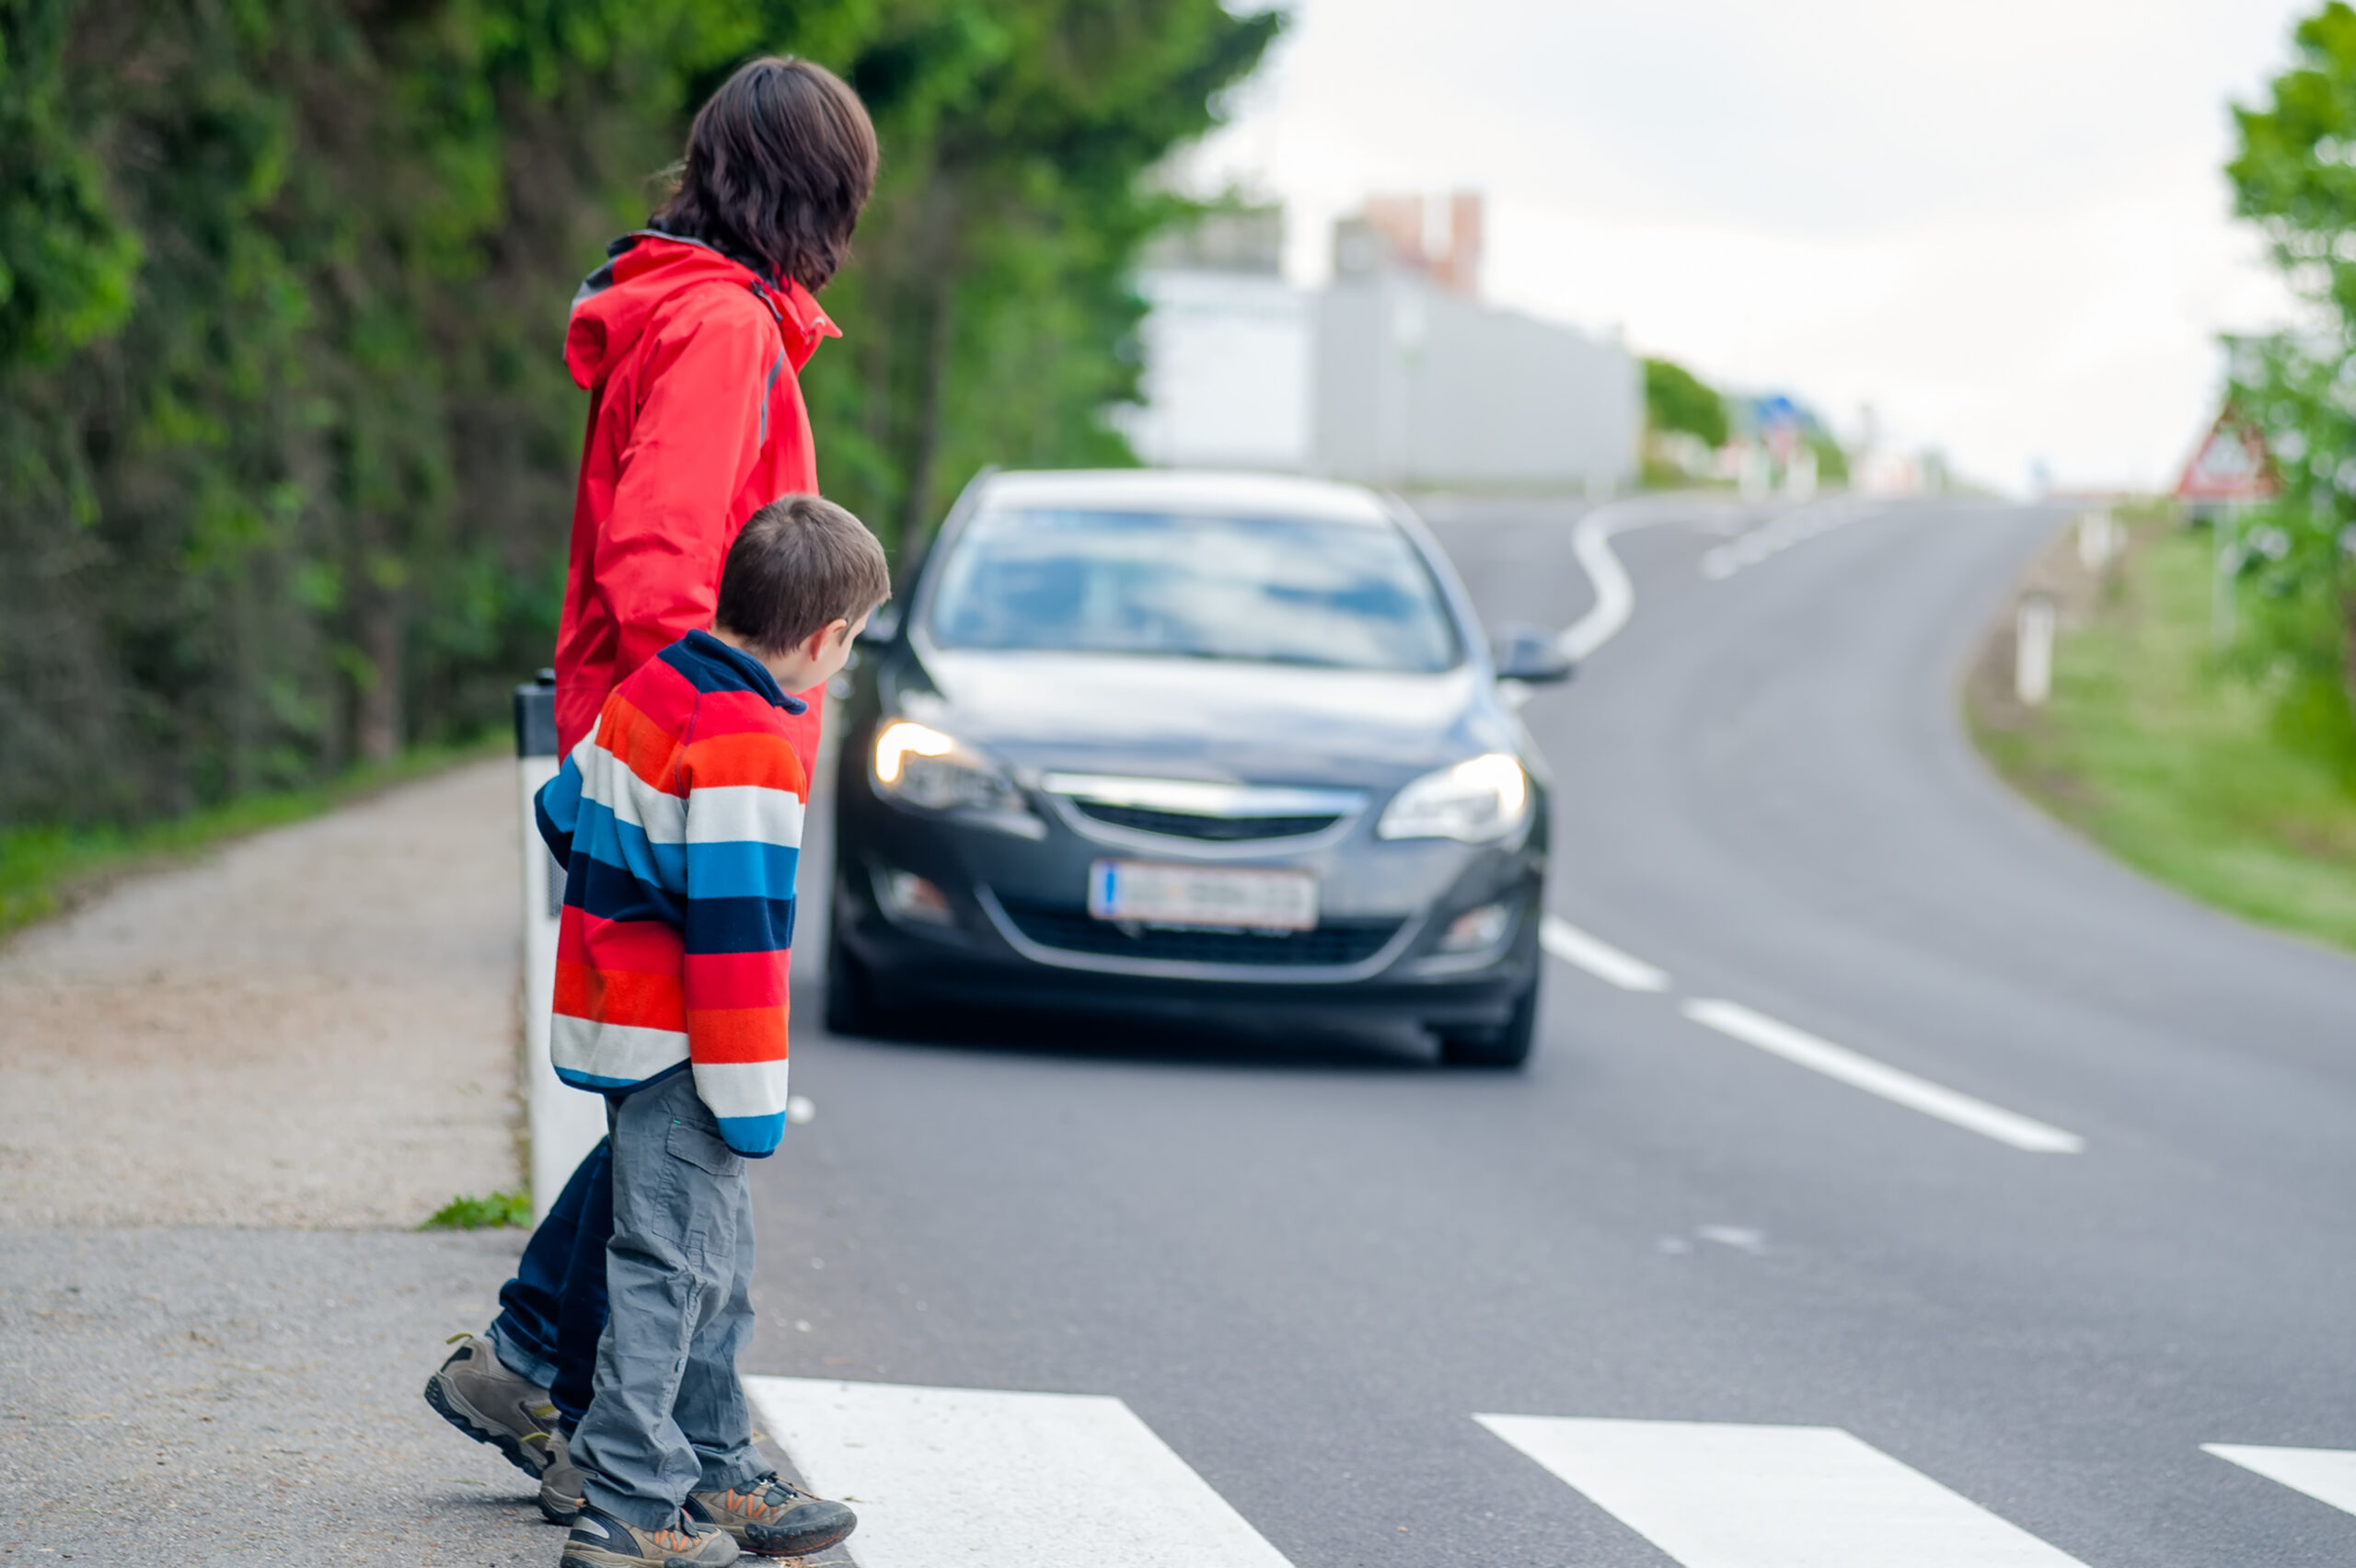 Advantages of Hiring a Pedestrian Accident Lawyer for Your Case